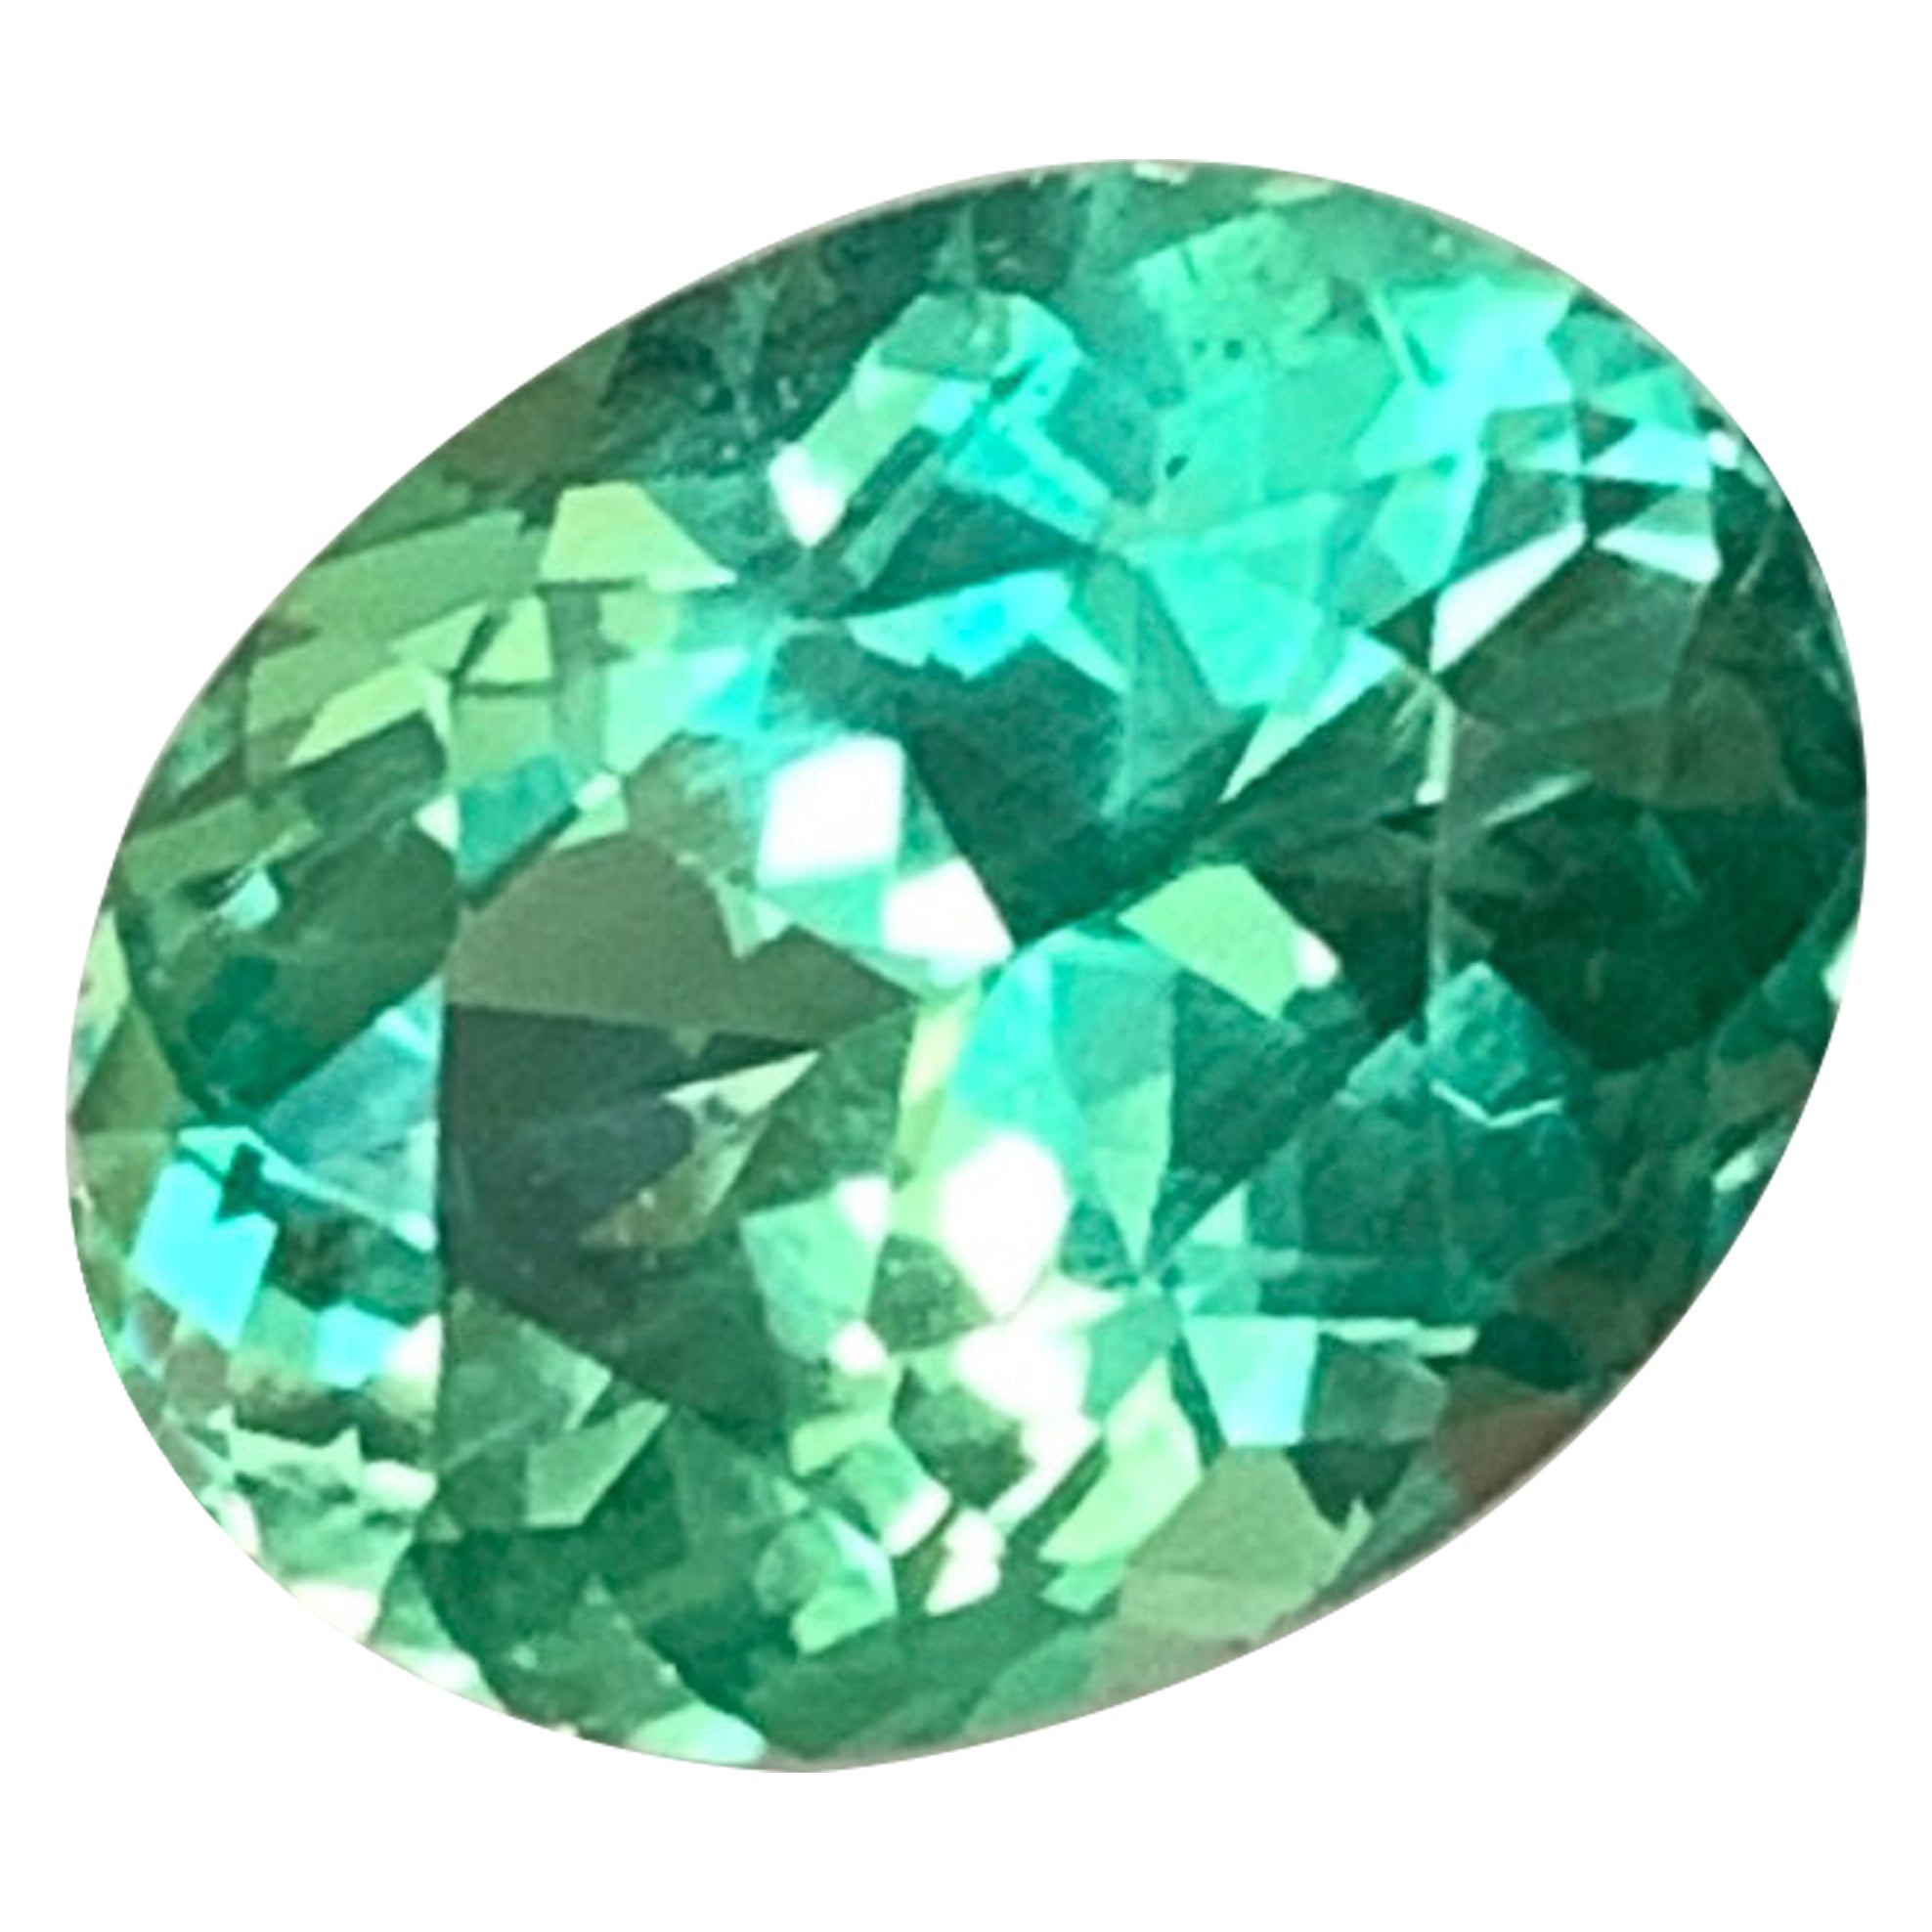 GIA Certified 1.66 Cts AAA Grade Green Rare Rare Kornerupine (Pismatine) For Sale